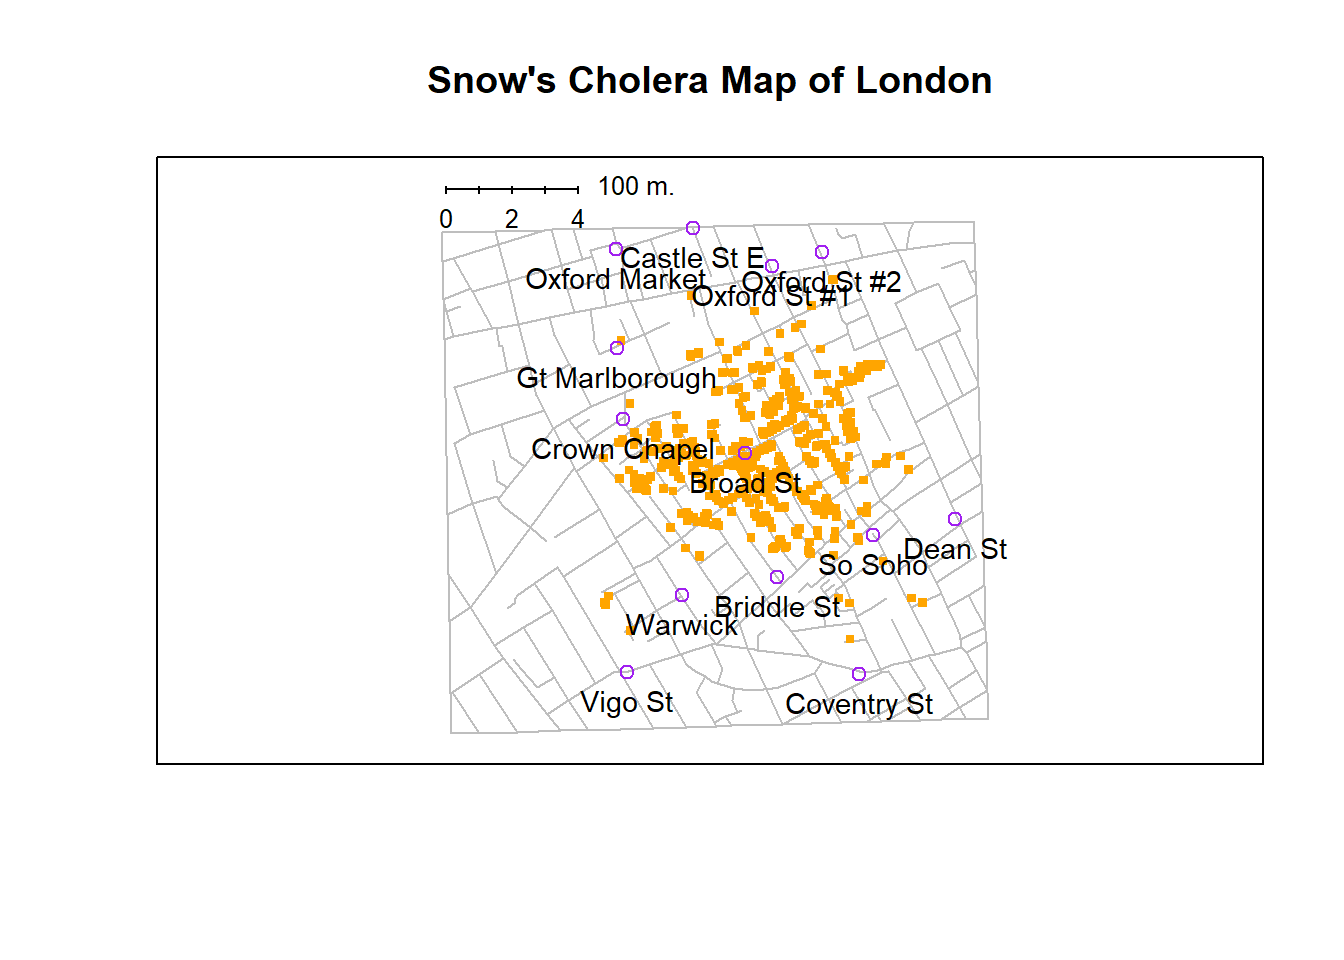 A stylised redrawing of John Snow's original cholera map. Each small dot represents the location of a cholera case, and each large circle shows the location of a well. As the plot makes clear, the cholera outbreak is centred very closely on the Broad St pump.  This image uses the data from the `HistData` package @[Friendly2011], and was drawn using minor alterations to the commands provided in the help files. Note that Snow's original hand drawn map used different symbols and labels, but you get the idea.